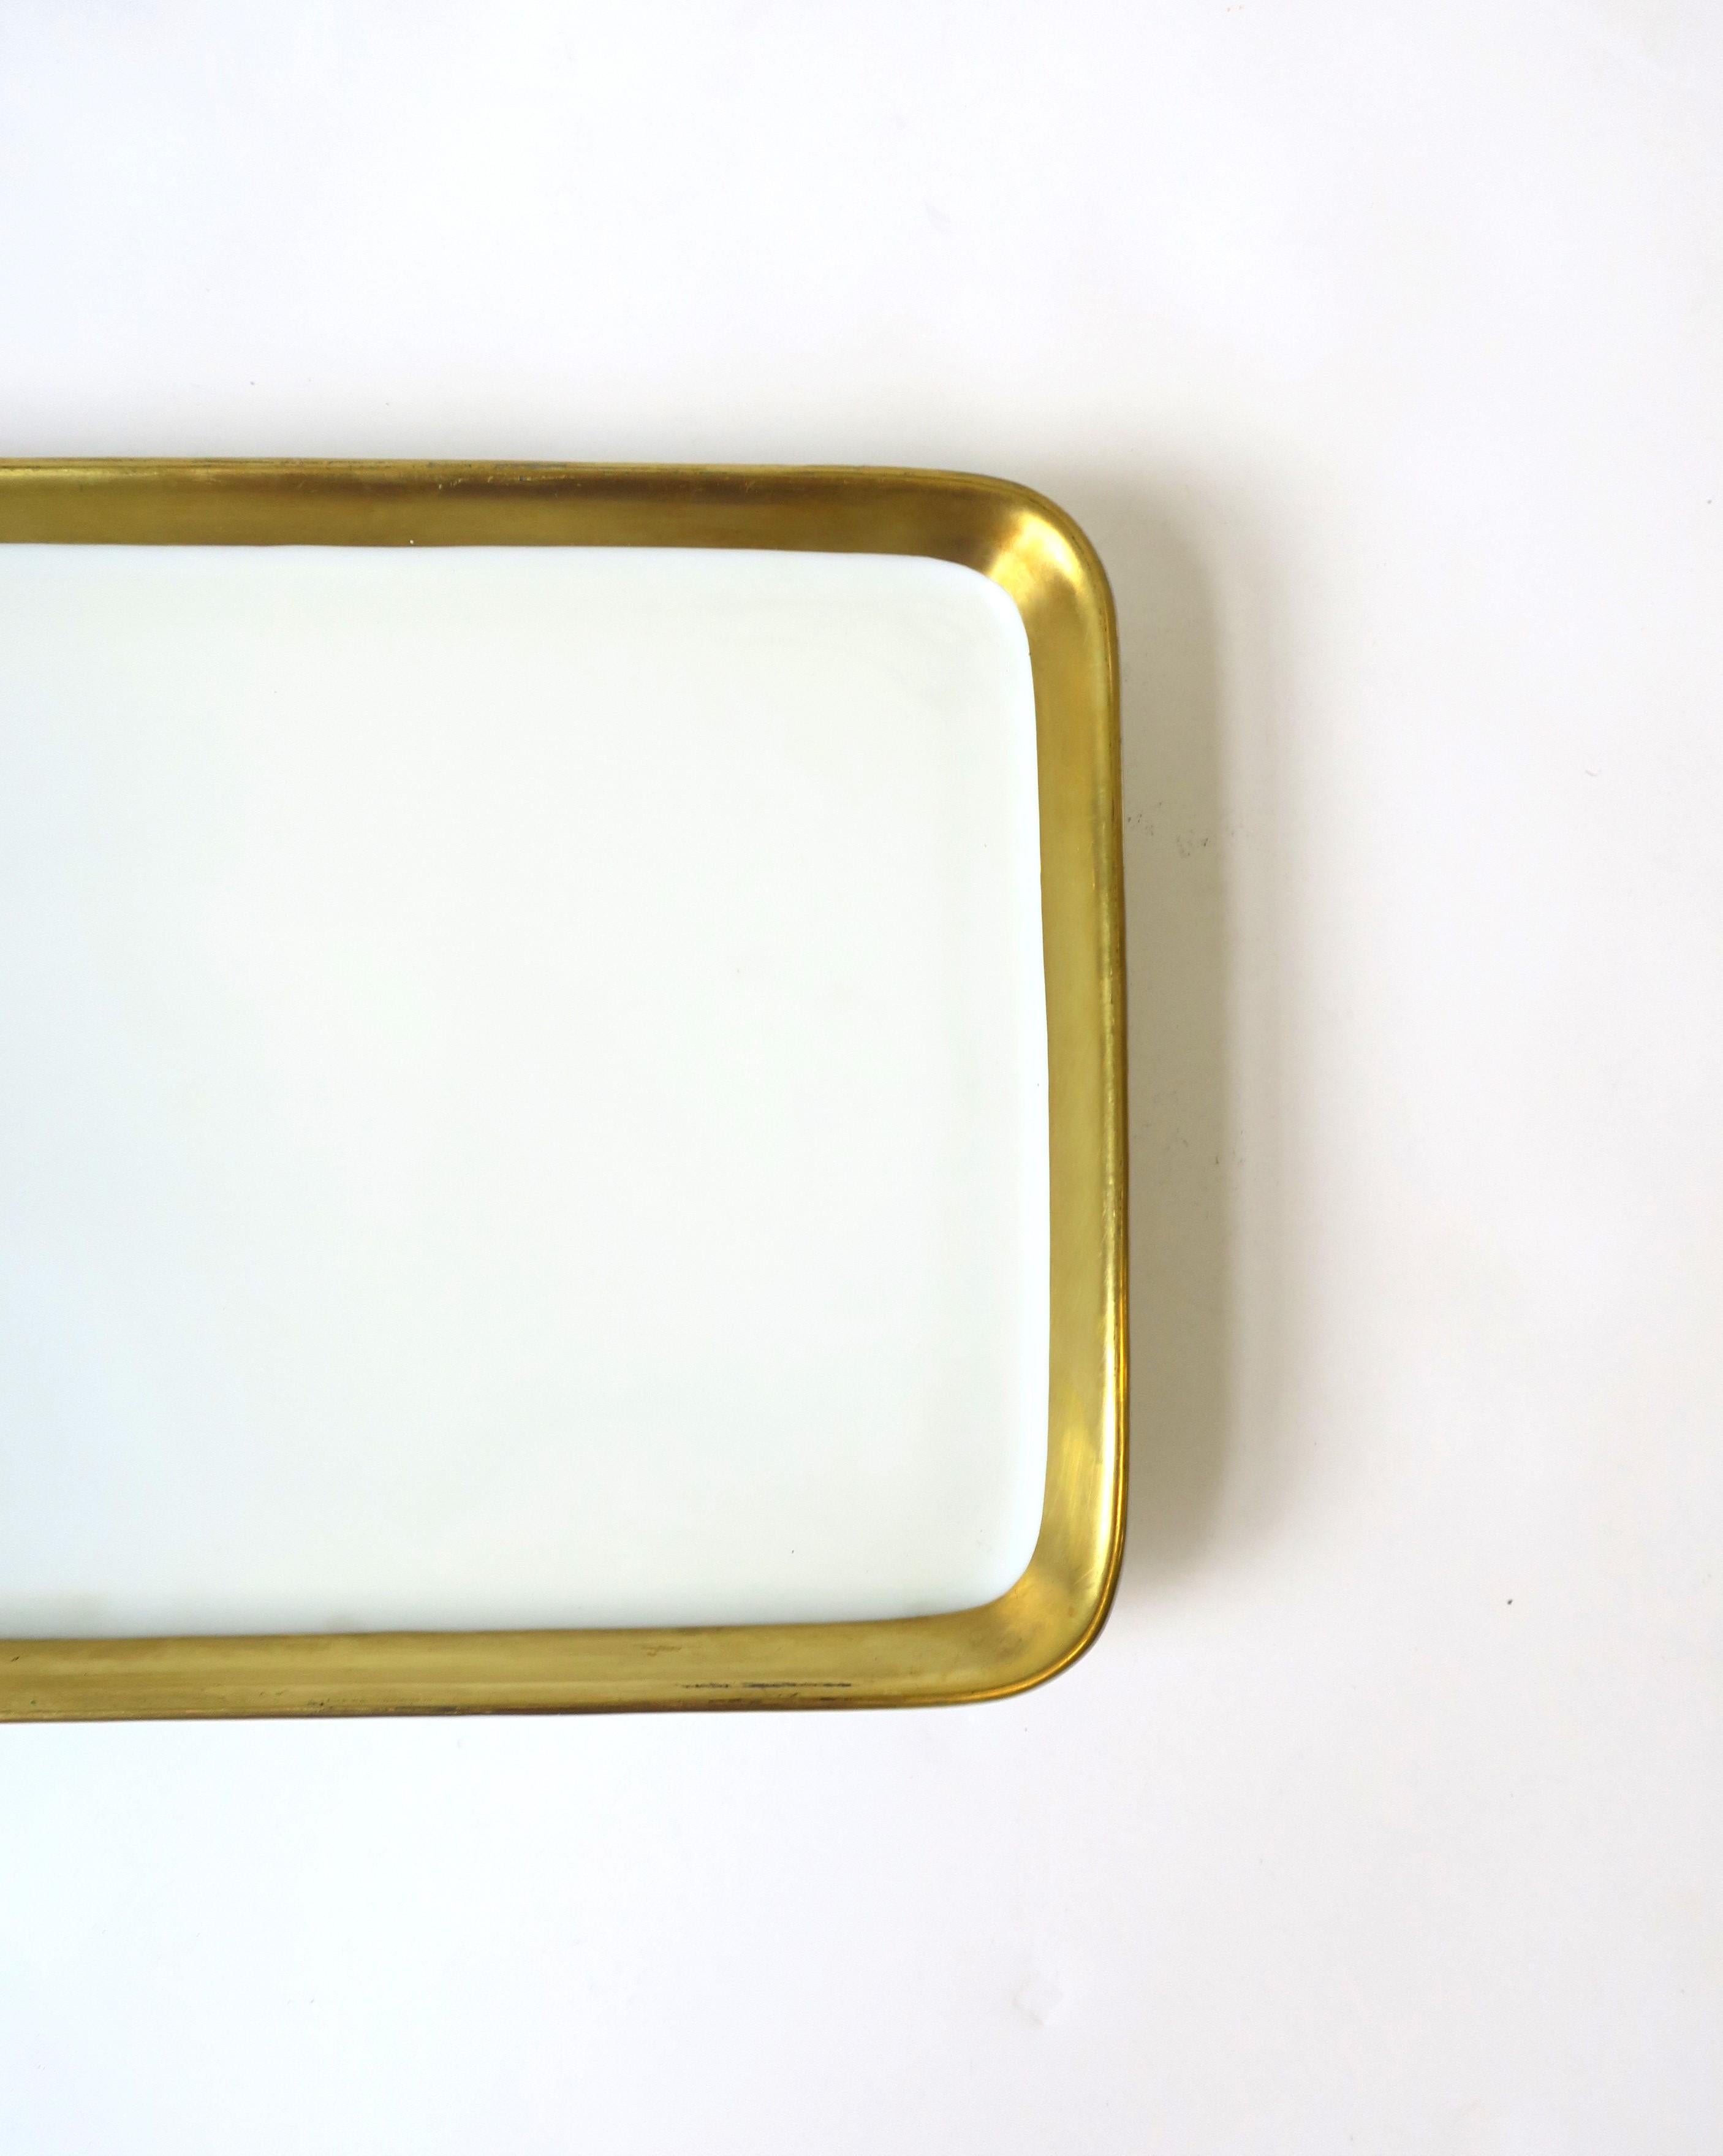 White Porcelain and Gold Serving Tray by Rosenthal Kurfurstendamm Berlin For Sale 4